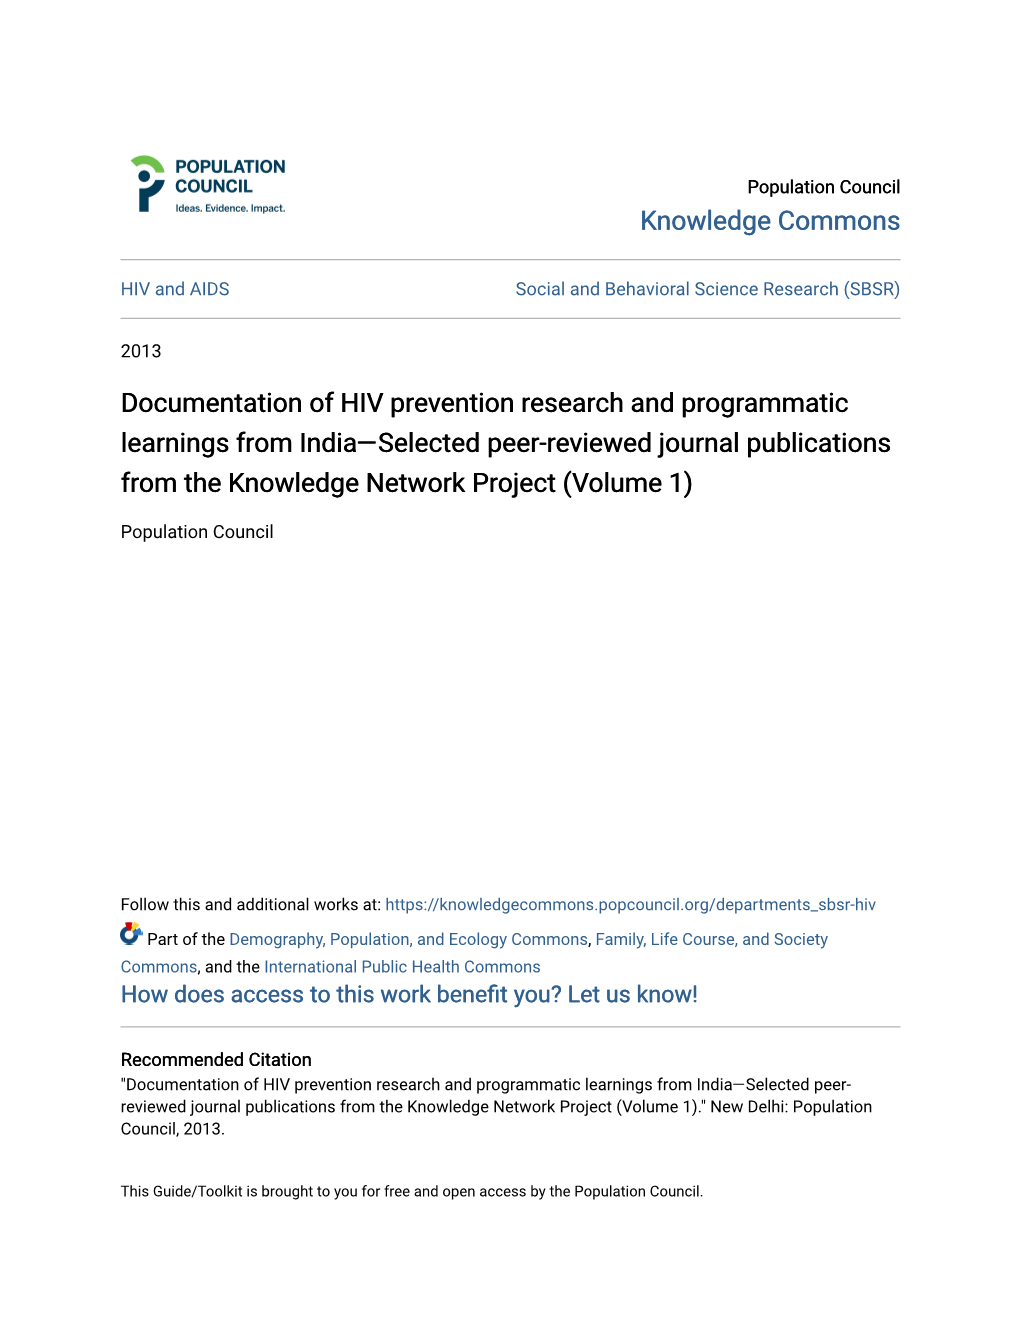 Documentation of HIV Prevention Research and Programmatic Learnings from India—Selected Peer-Reviewed Journal Publications